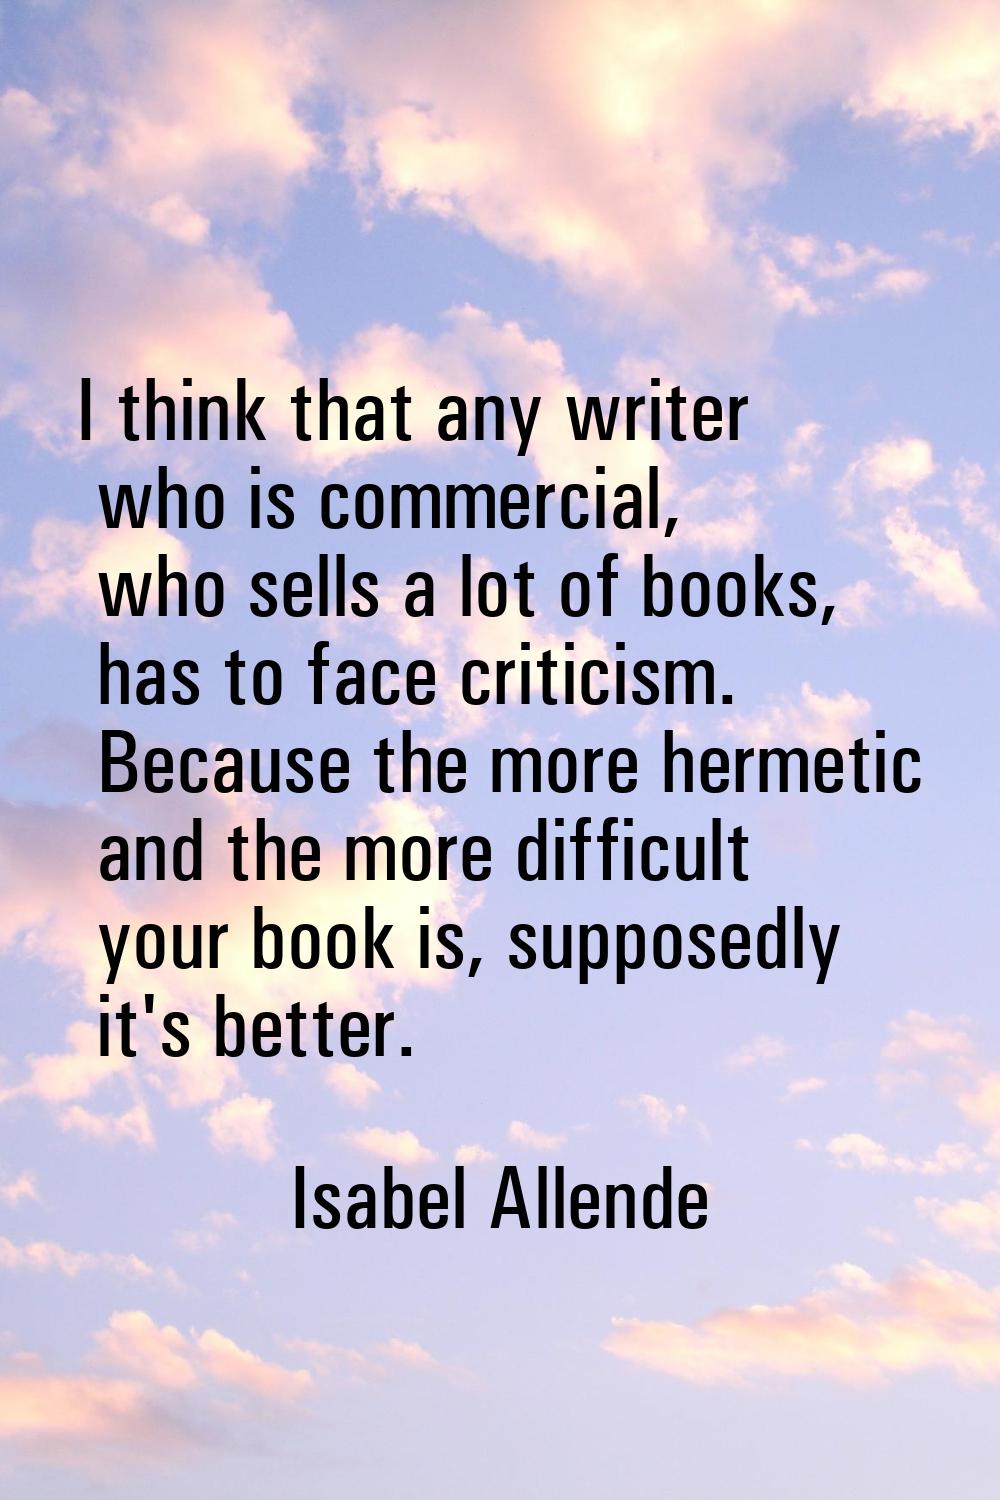 I think that any writer who is commercial, who sells a lot of books, has to face criticism. Because